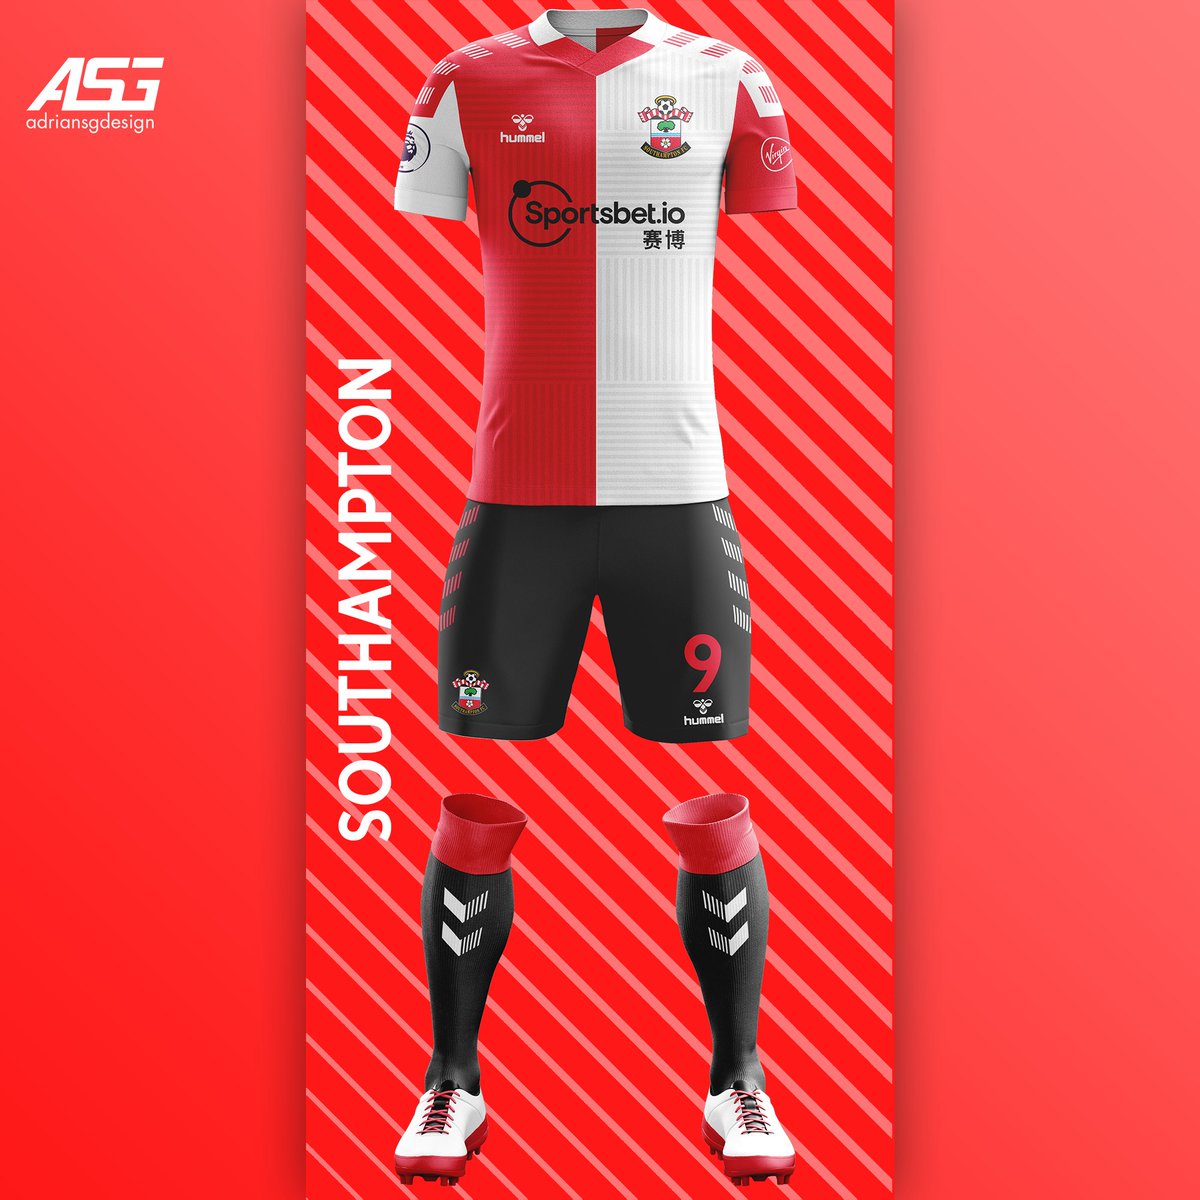 Southampton  @SouthamptonFC This is their first season with Hummel kits. Red and white half and half shirt with the same square line pattern as the Everton kit.